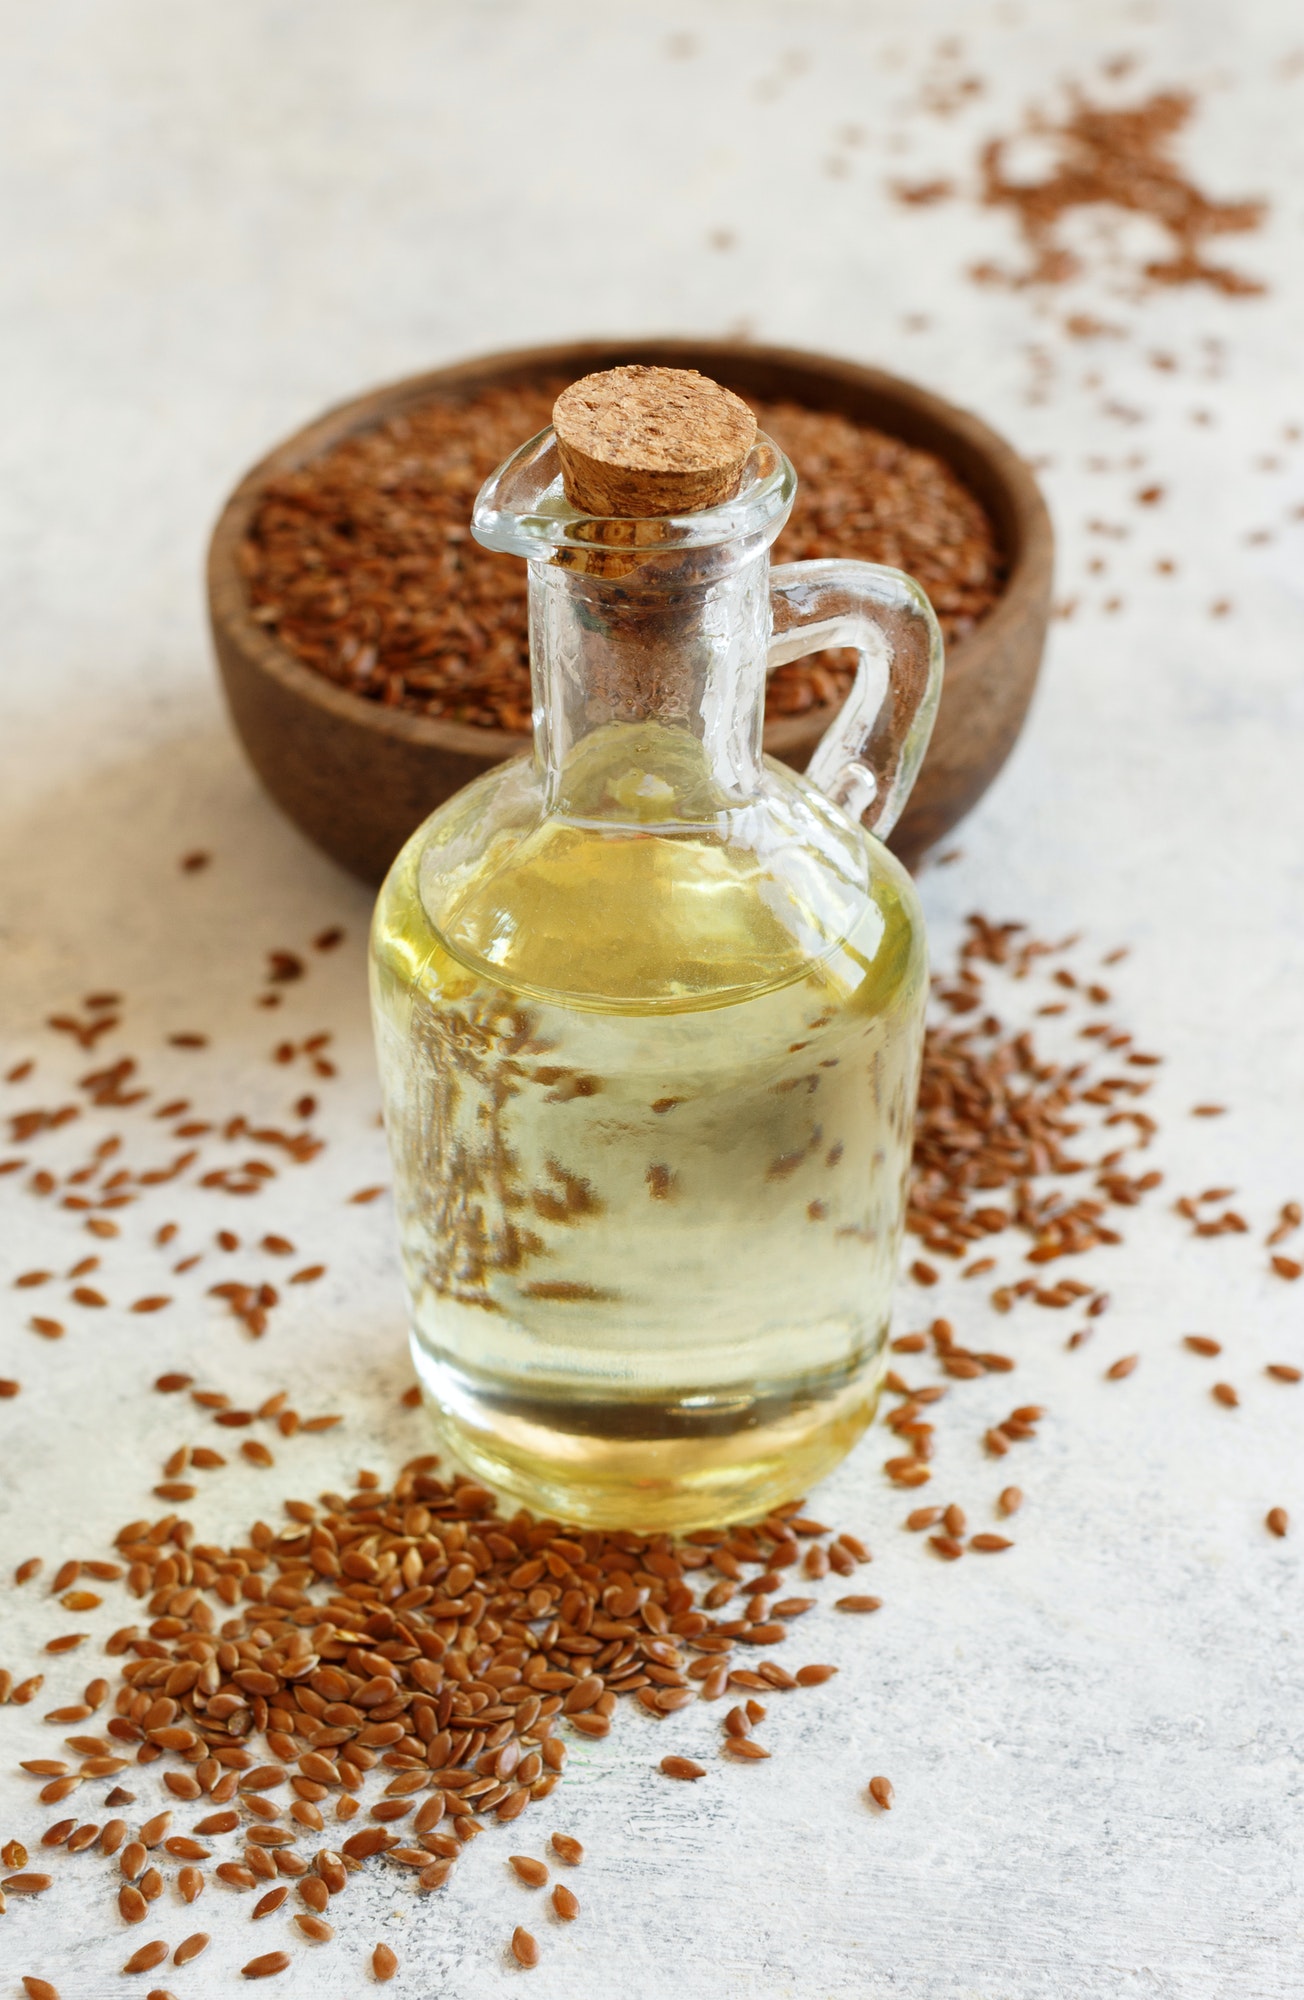 Raw Flax seeds oil and seeds